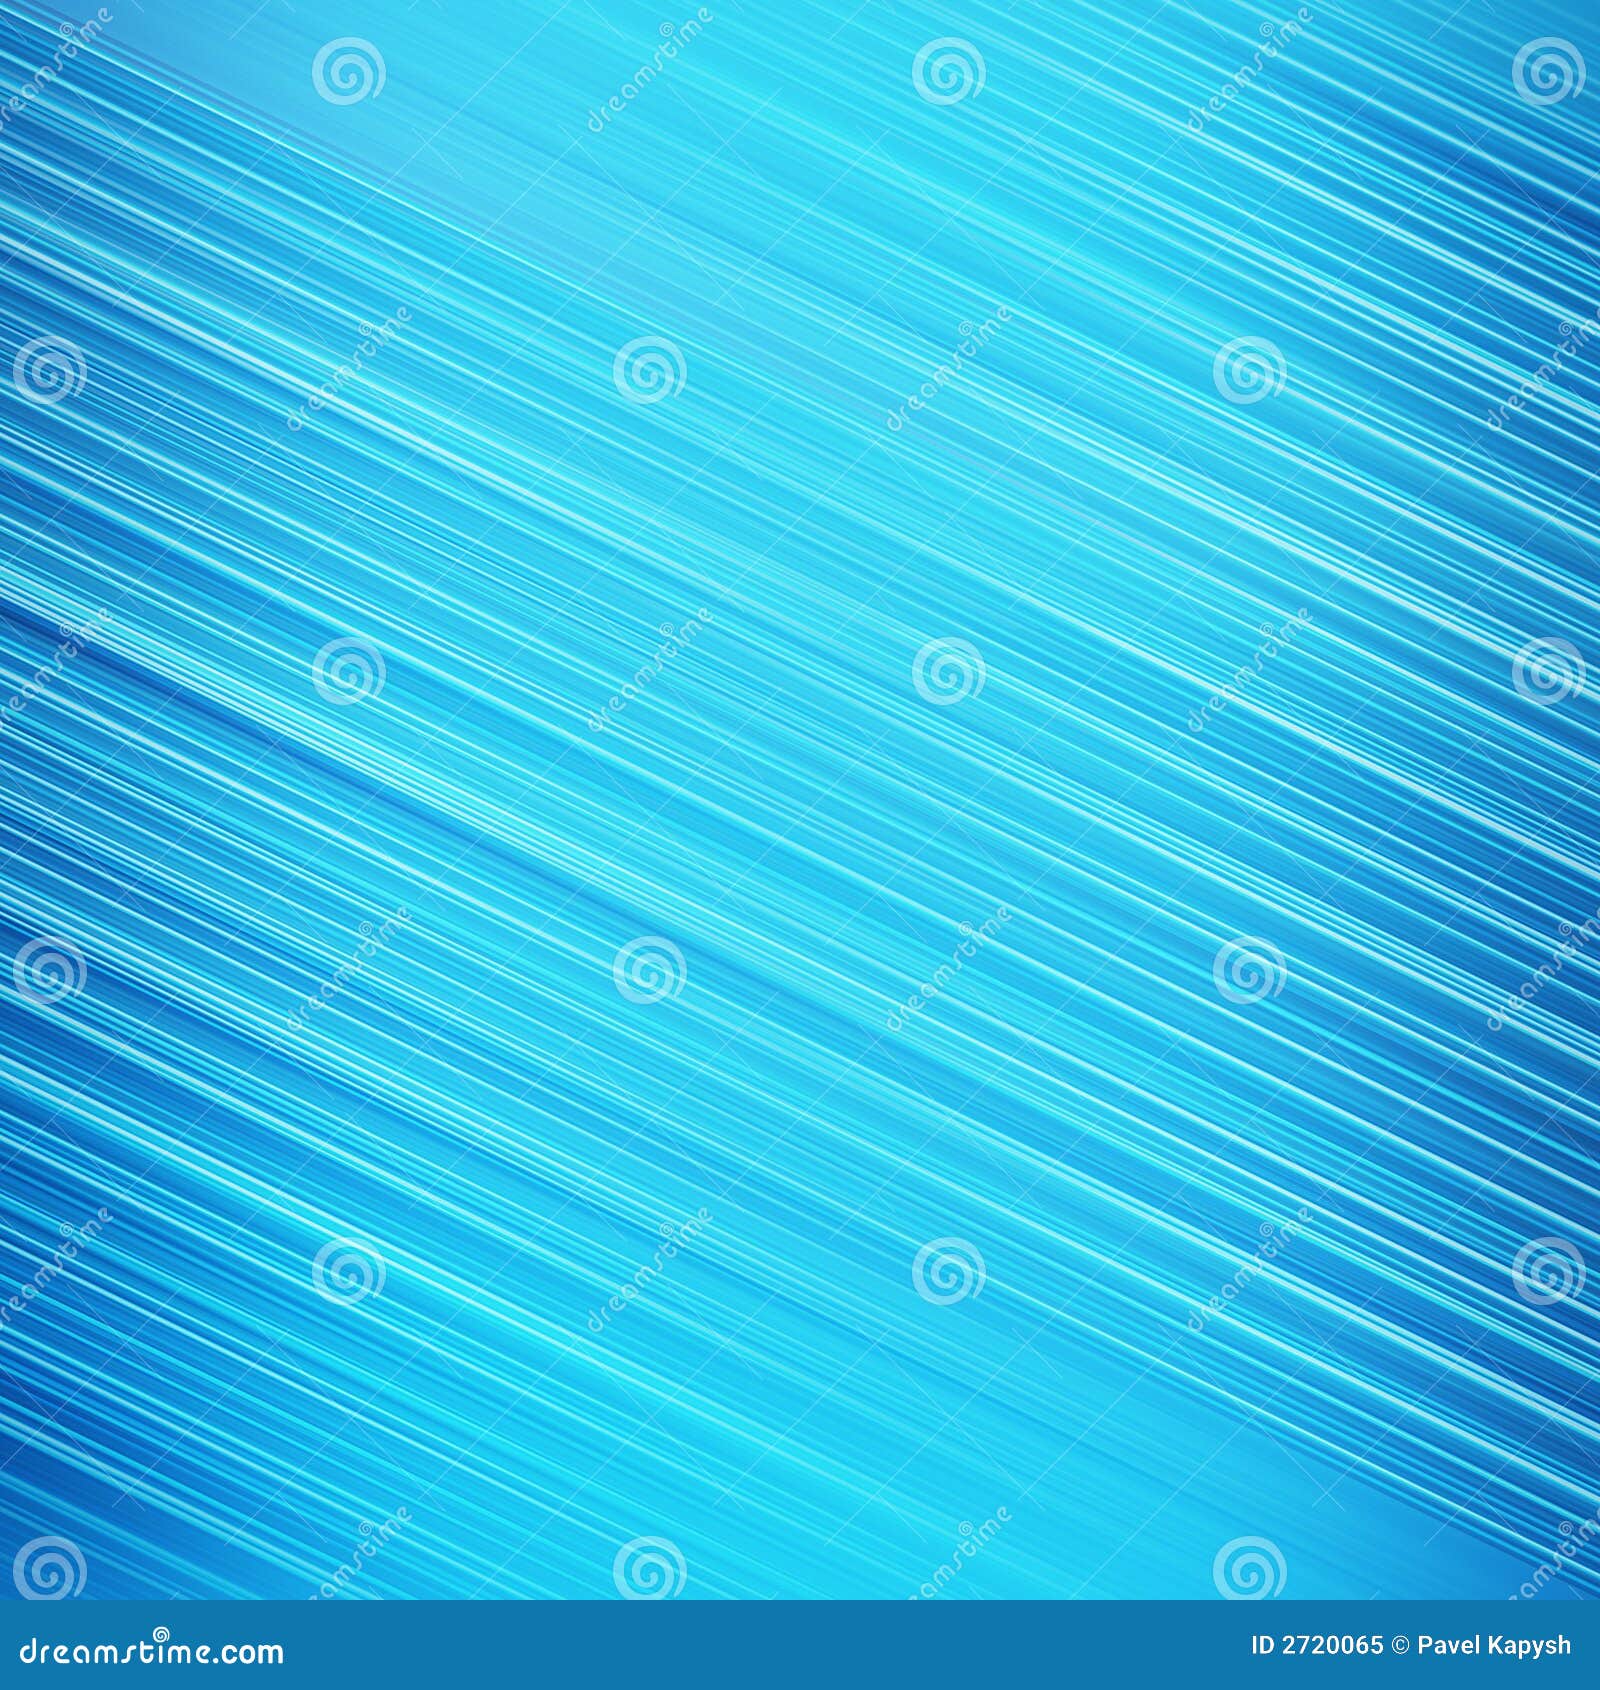 Abstract Blur Background stock illustration. Illustration of colorful ...